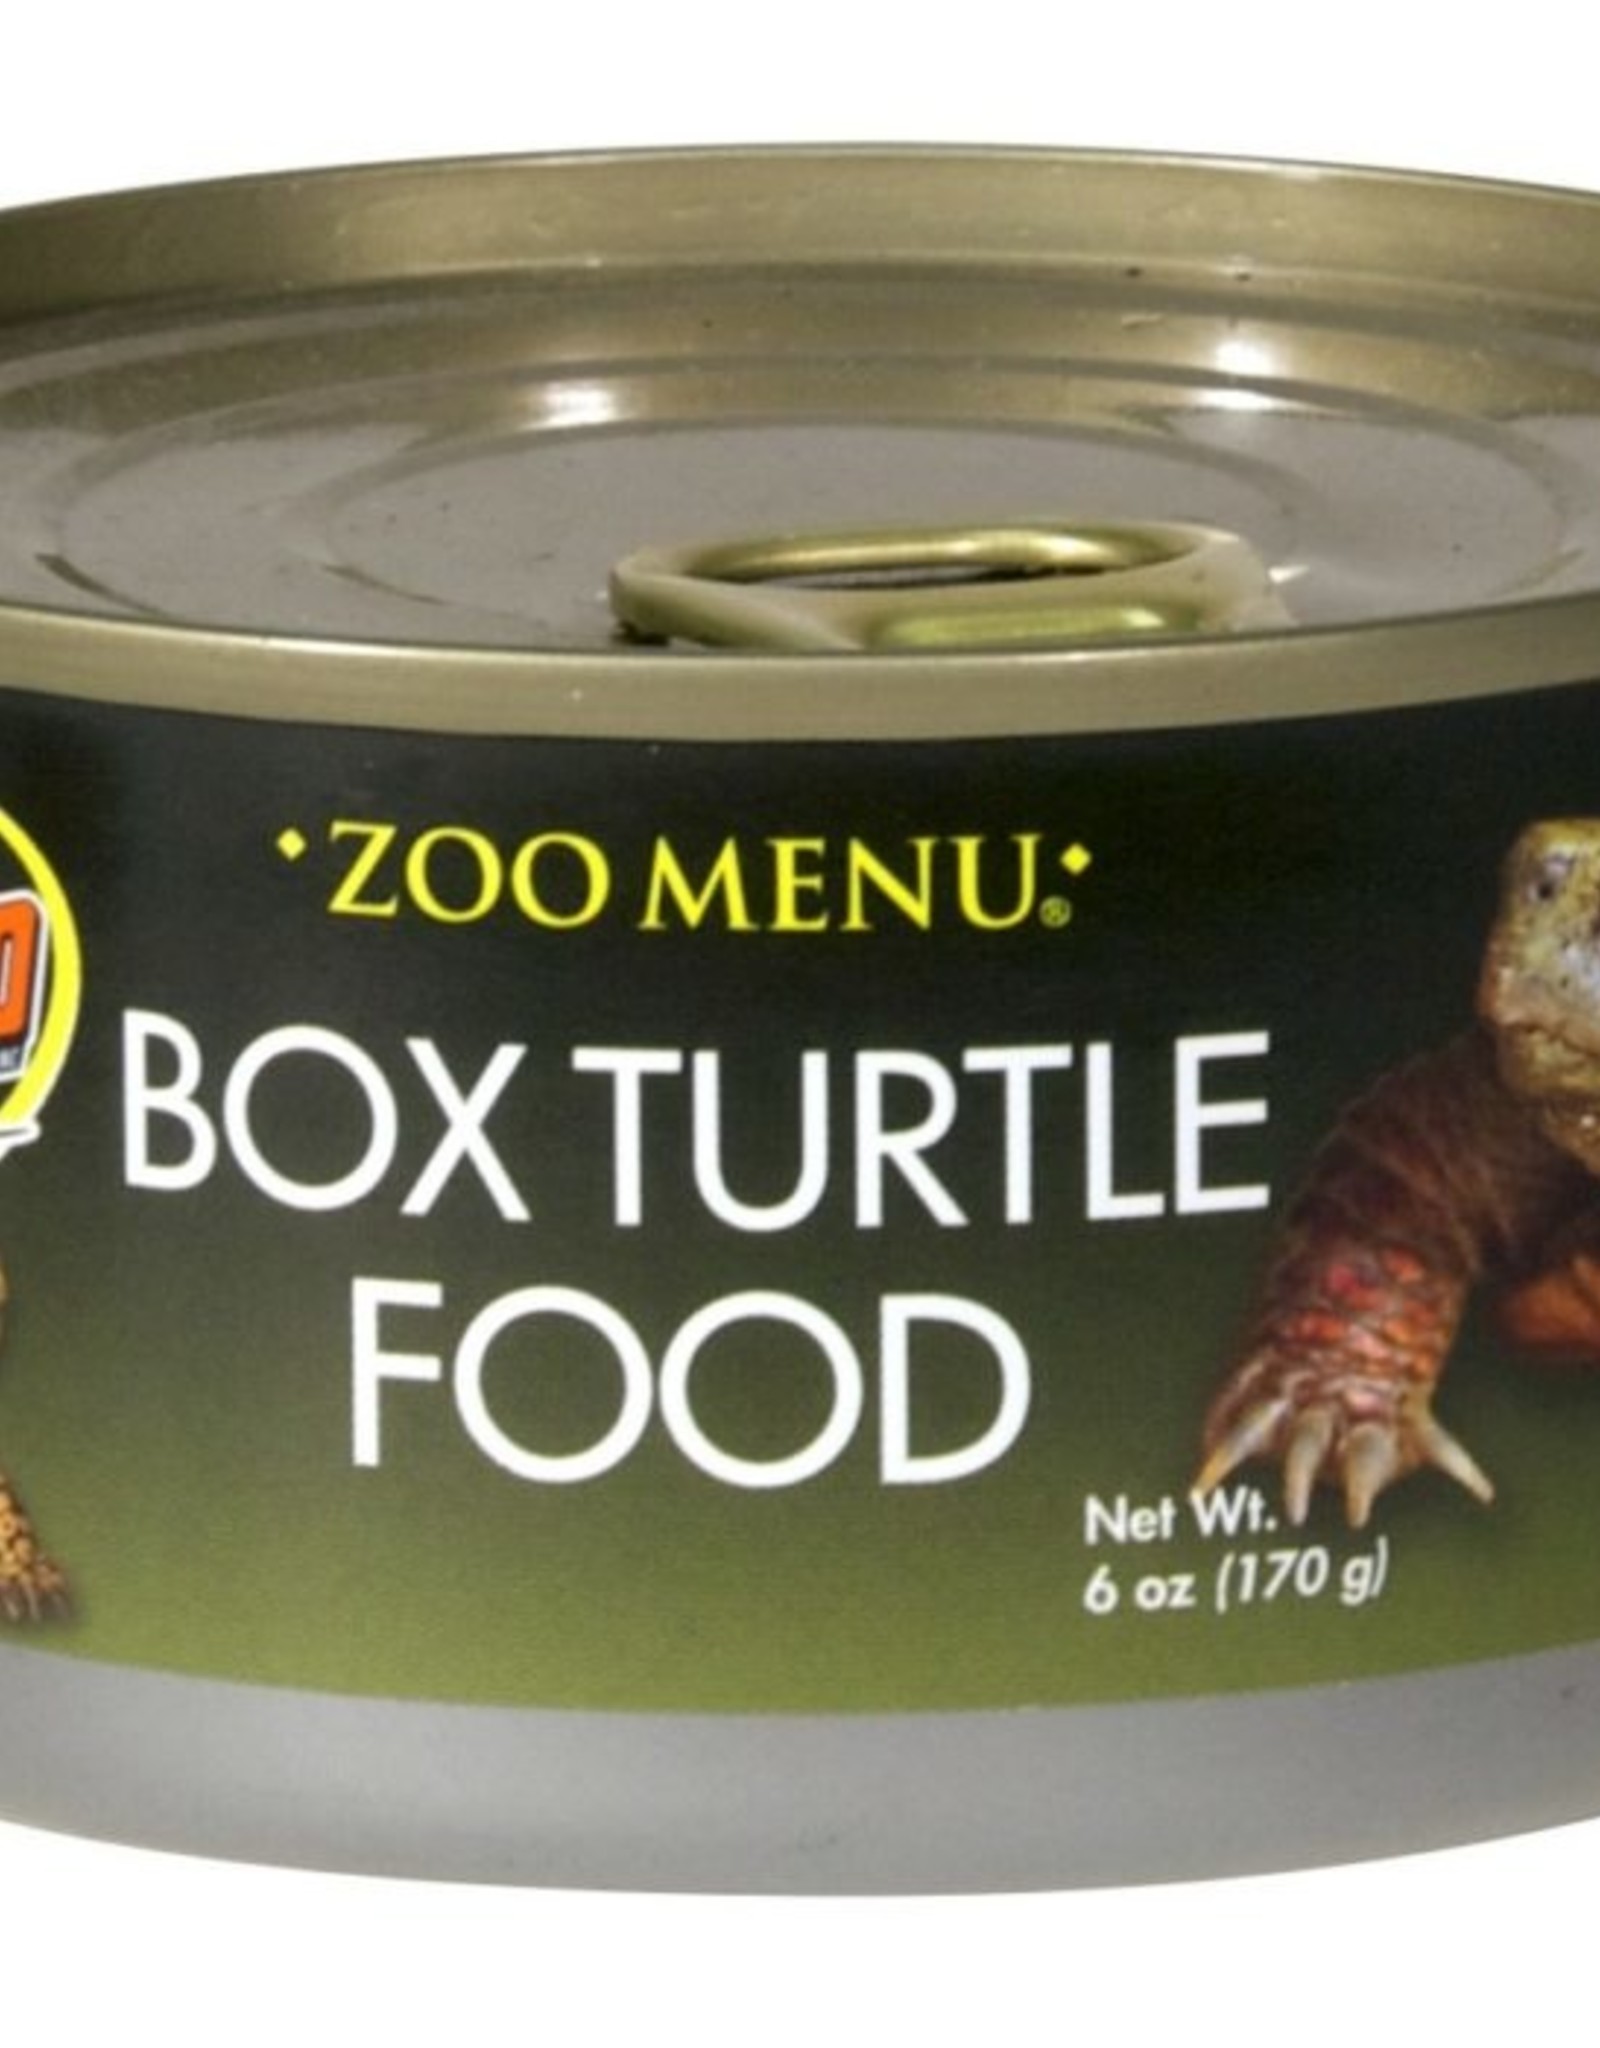 ZOO MED LABS INC BOX TURTLE FOOD 6OZ CAN ZOOMED